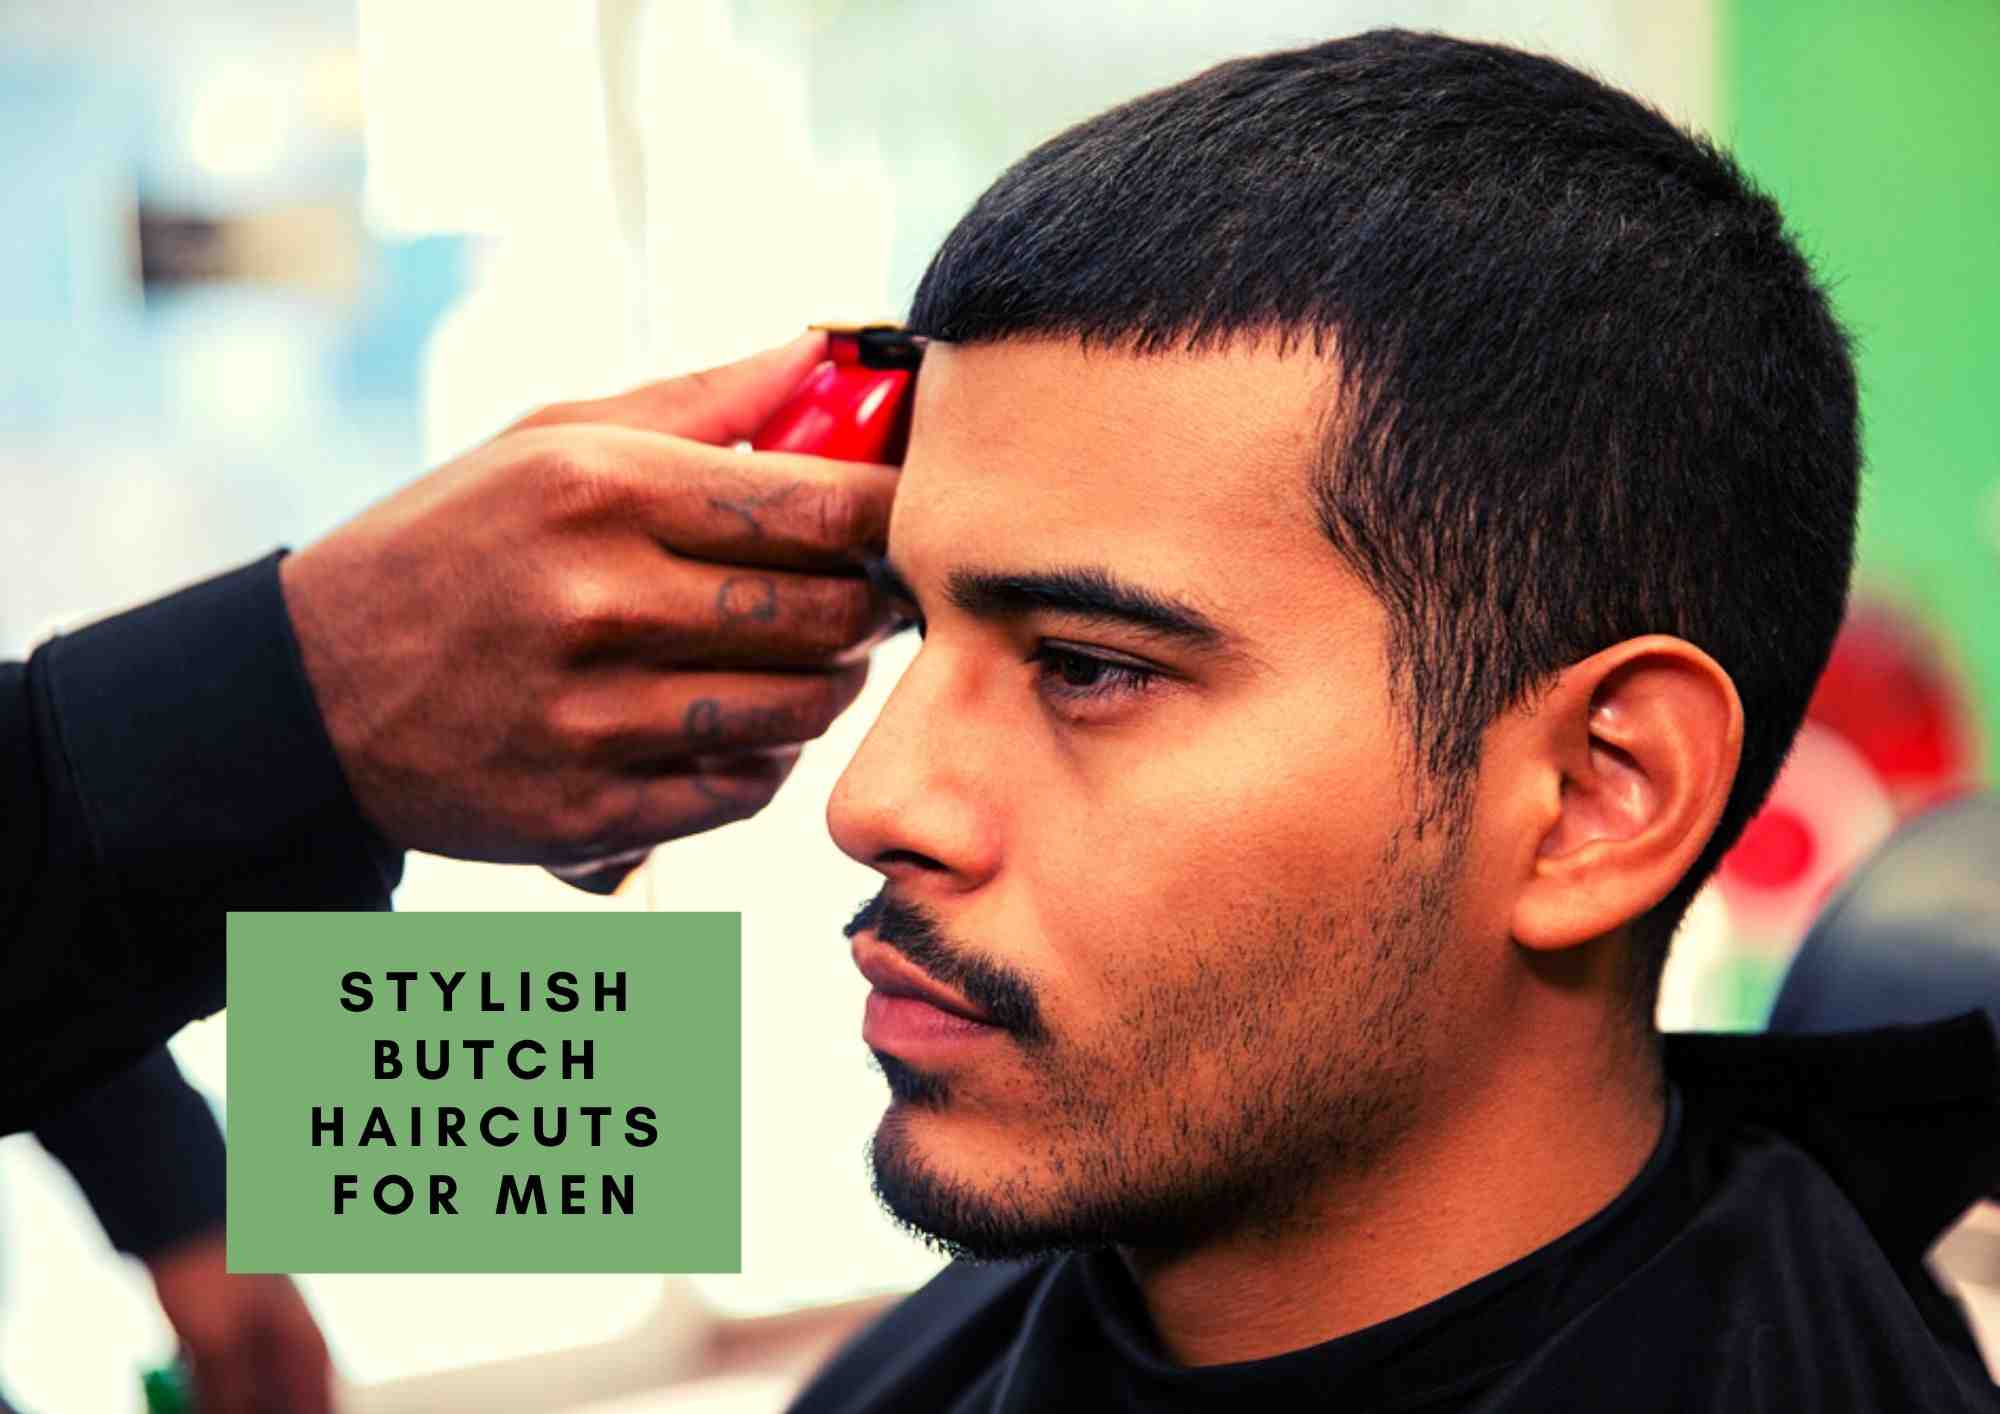 40 Types of Haircuts for Men  Men Hairstyles World